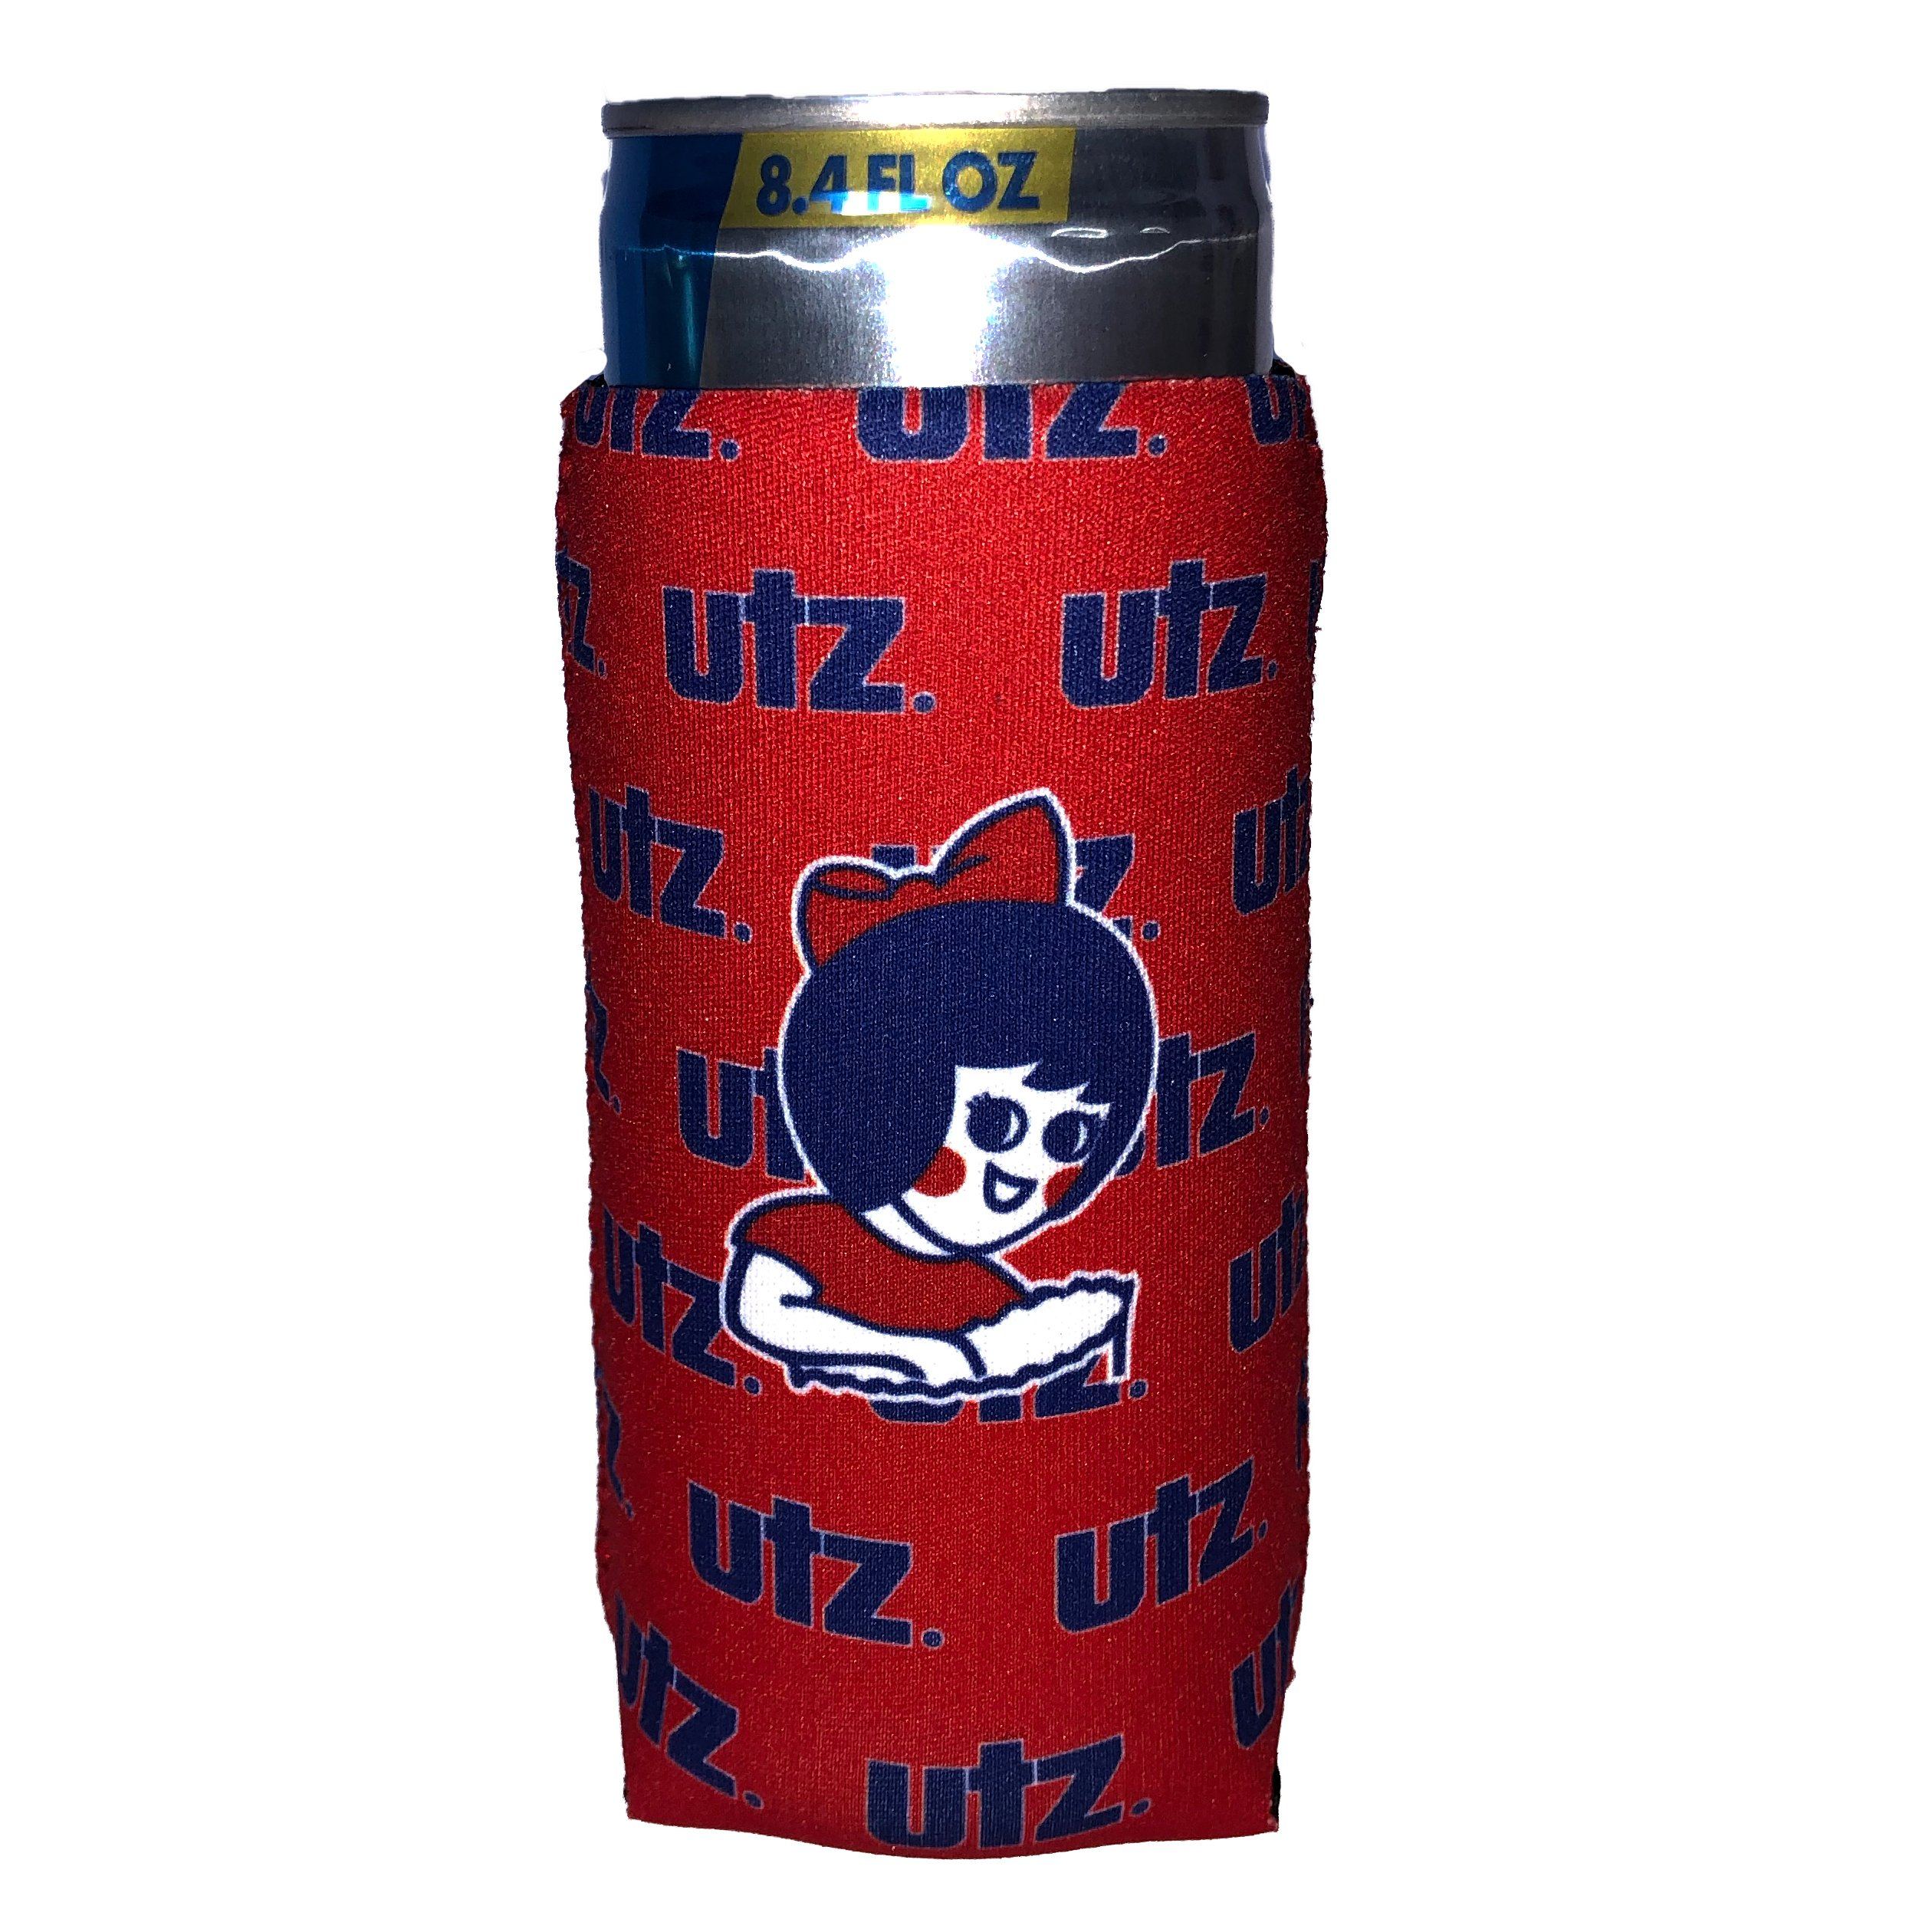 Utz Girl with Text Pattern (Red) / Slim Can Cooler - Route One Apparel